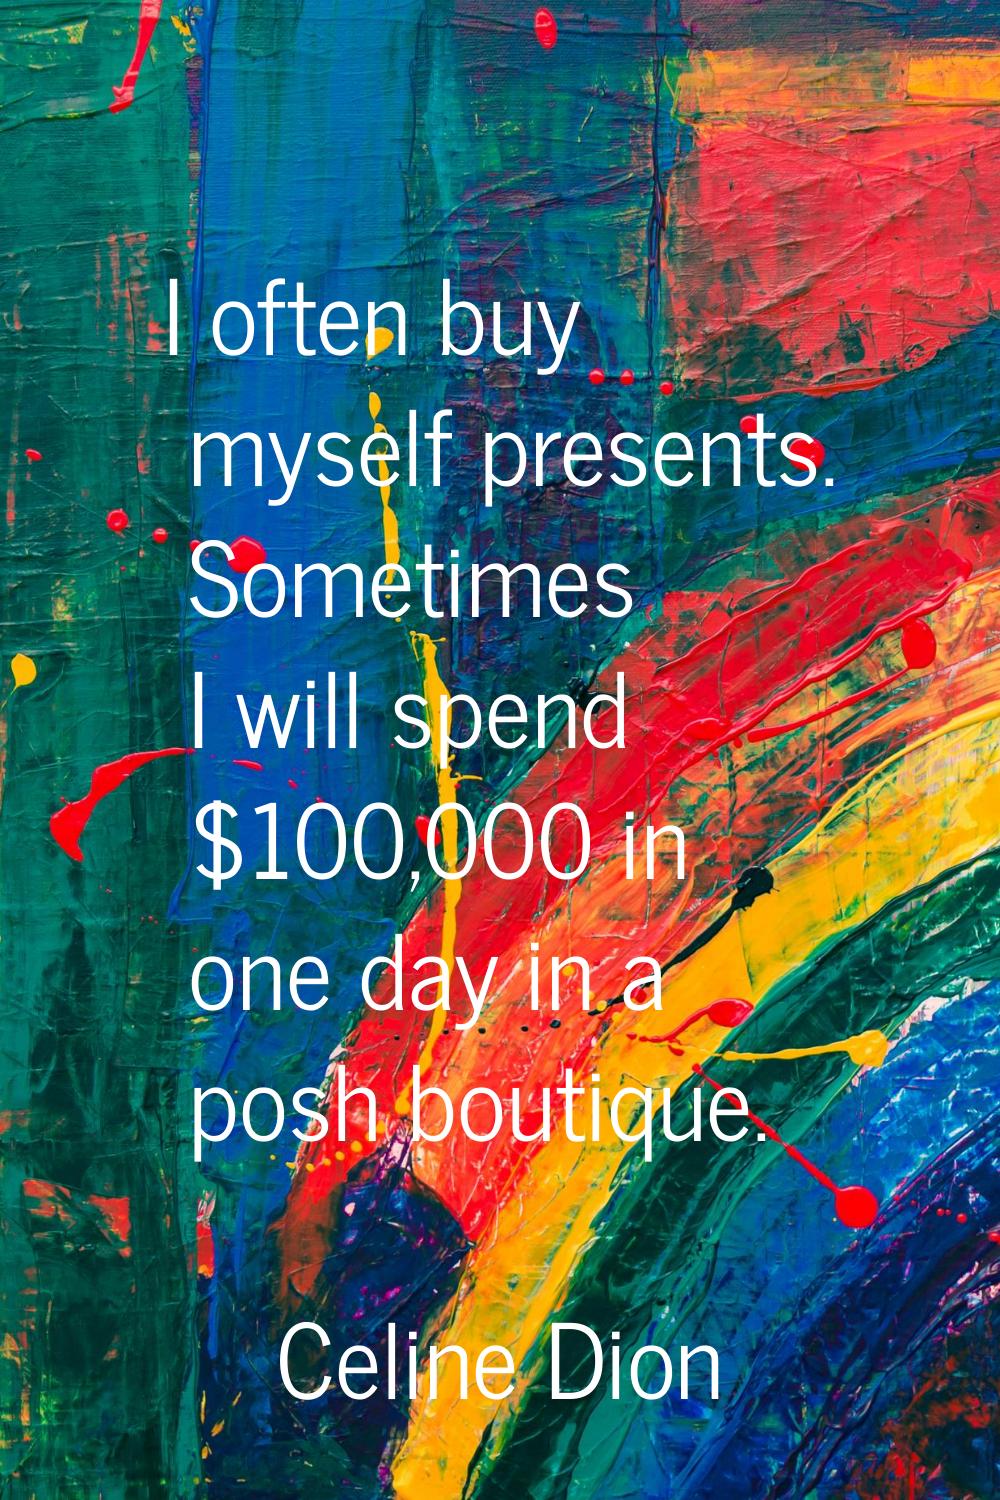 I often buy myself presents. Sometimes I will spend $100,000 in one day in a posh boutique.